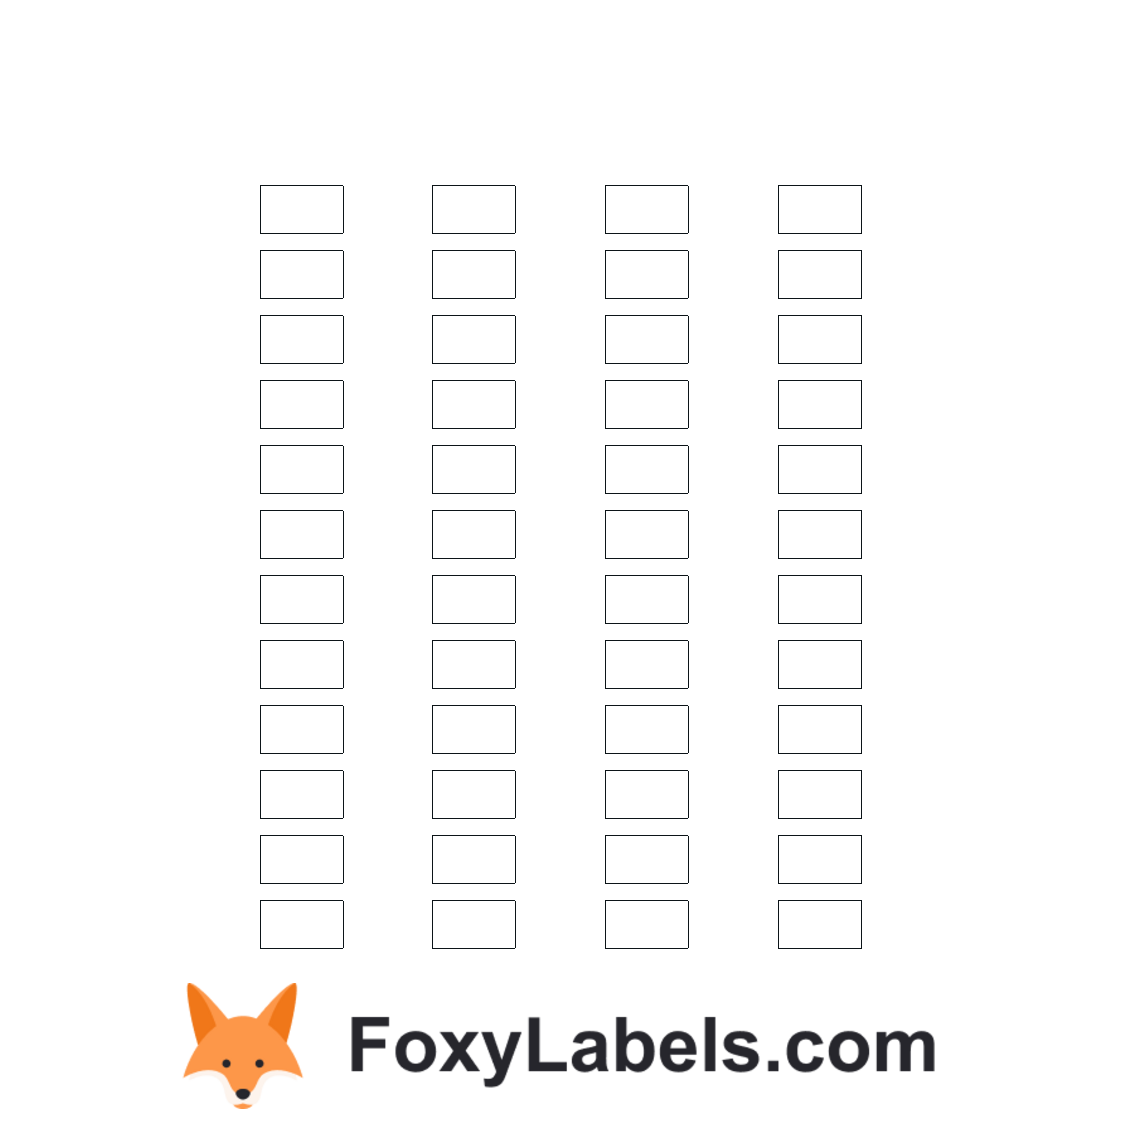 Avery® L7553 label template for Google Docs